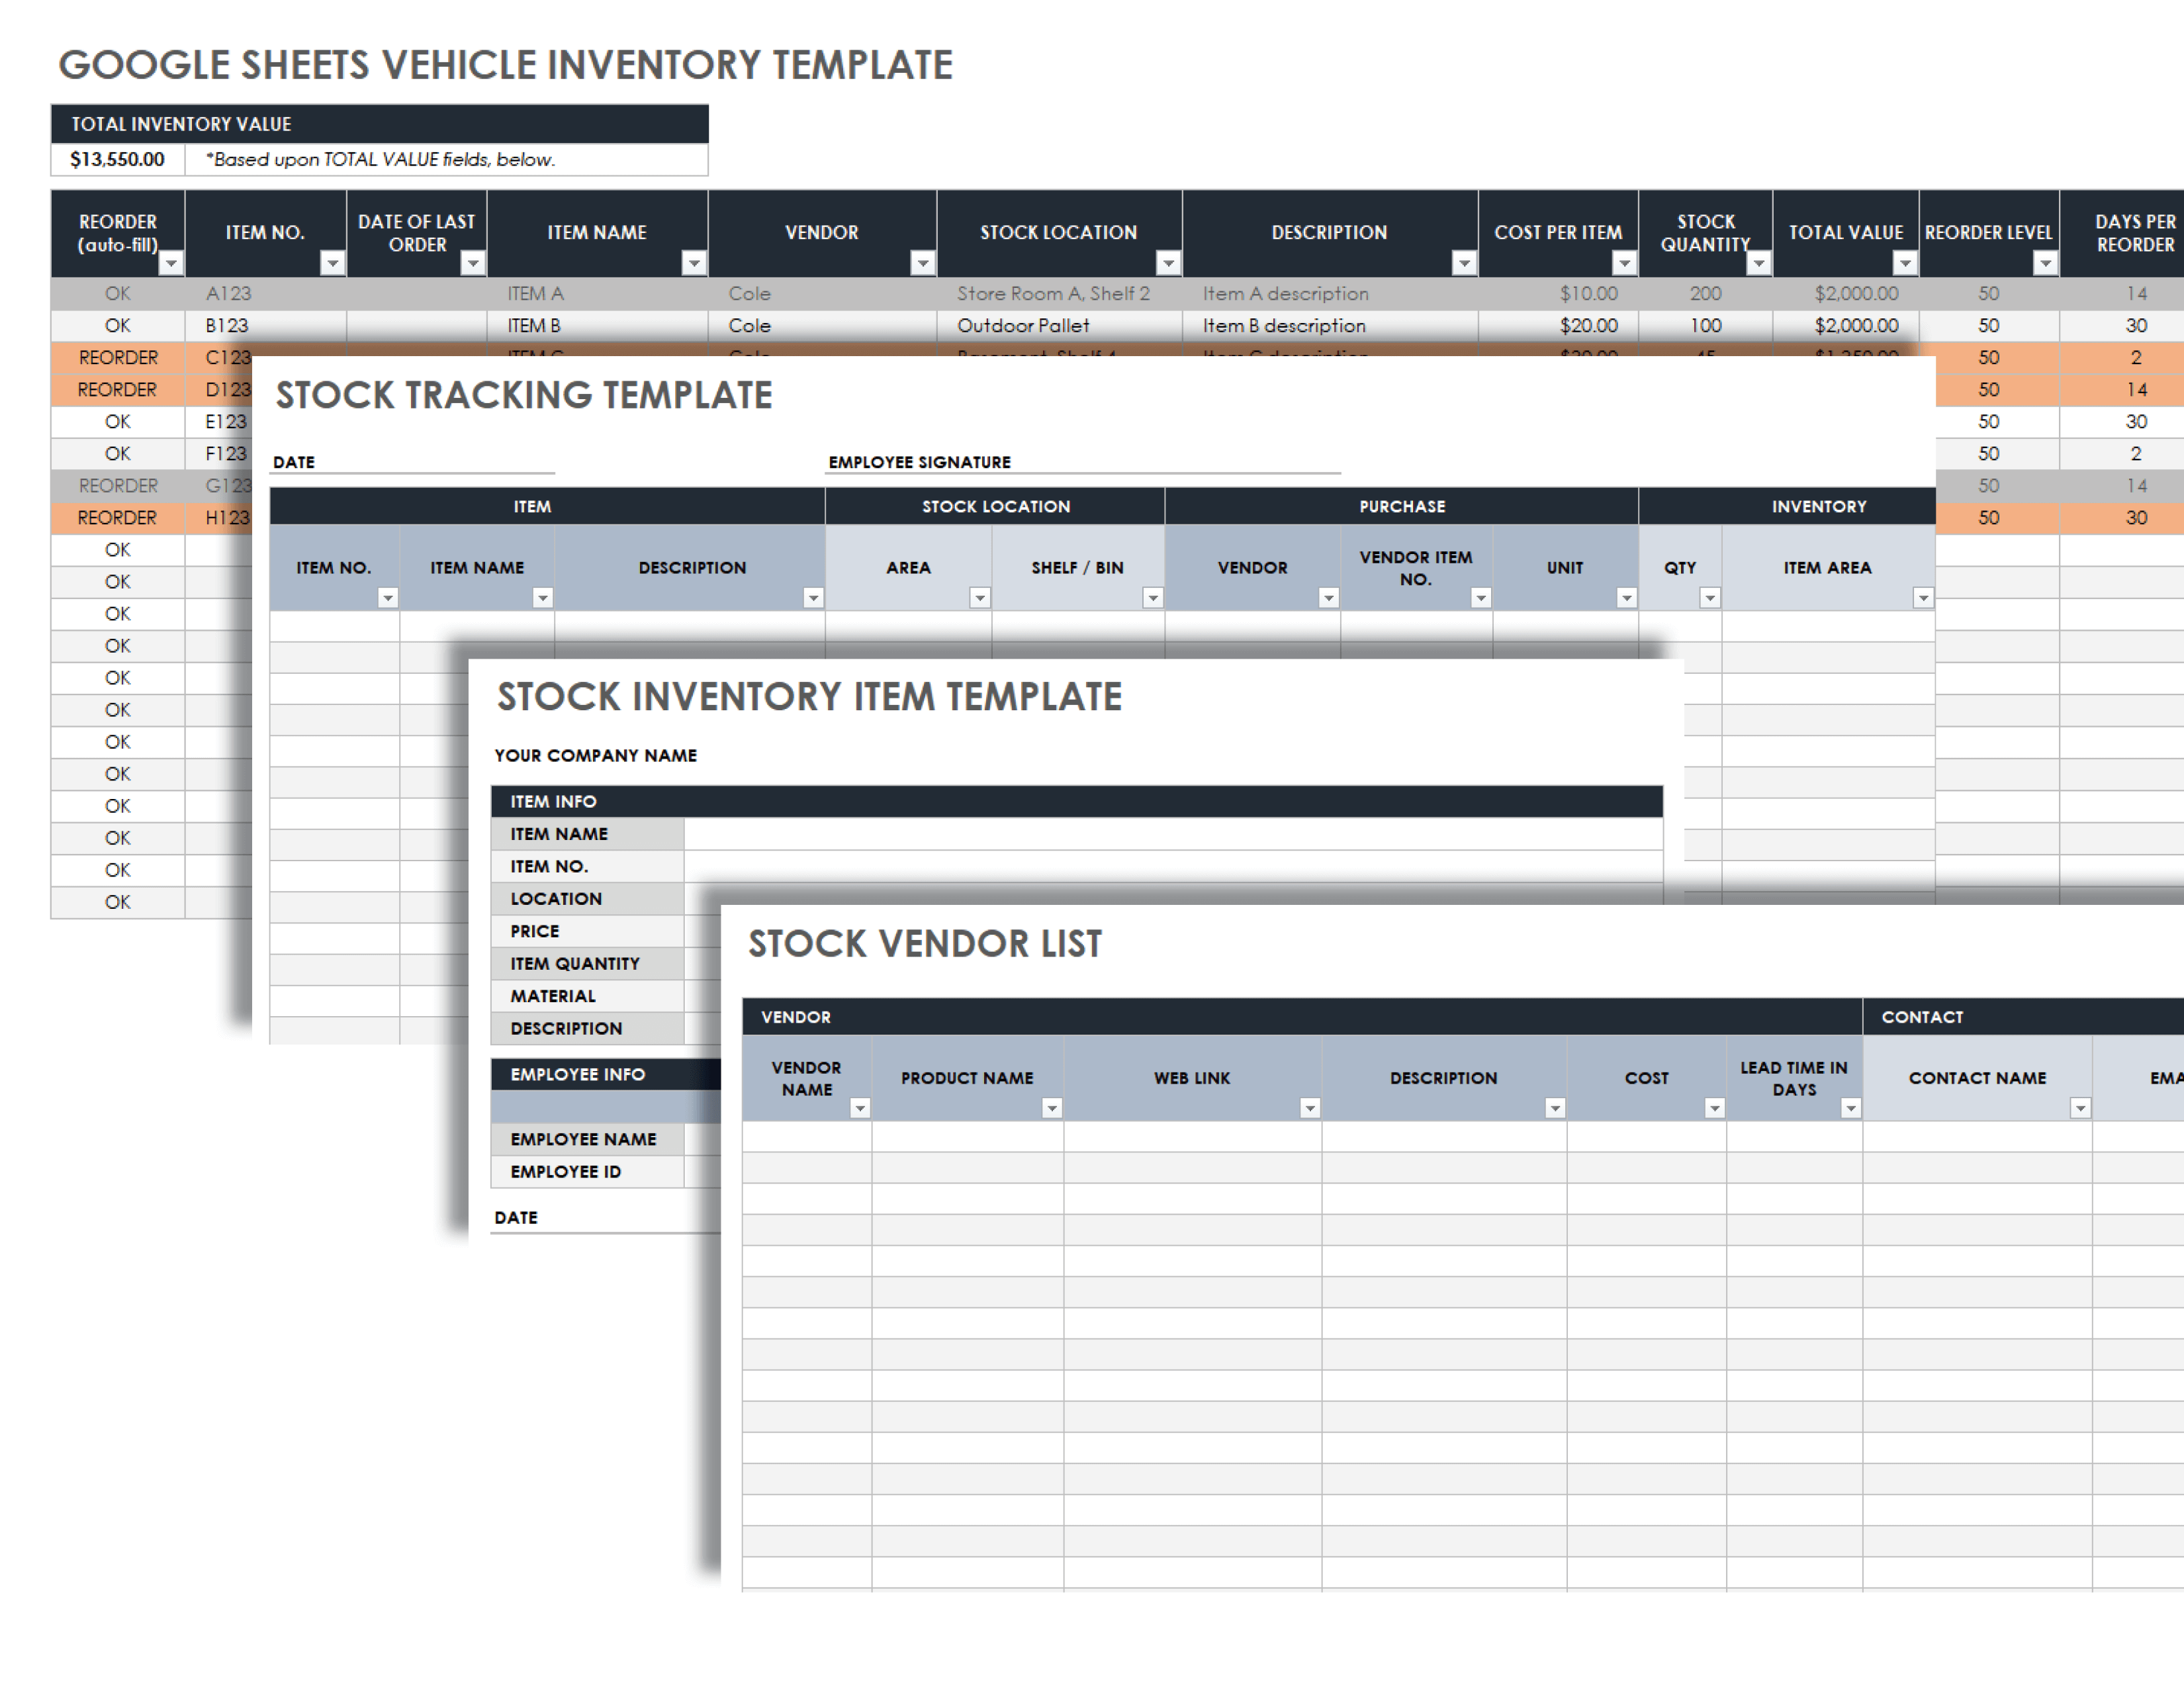 Google Sheets Vehicle Inventory Template